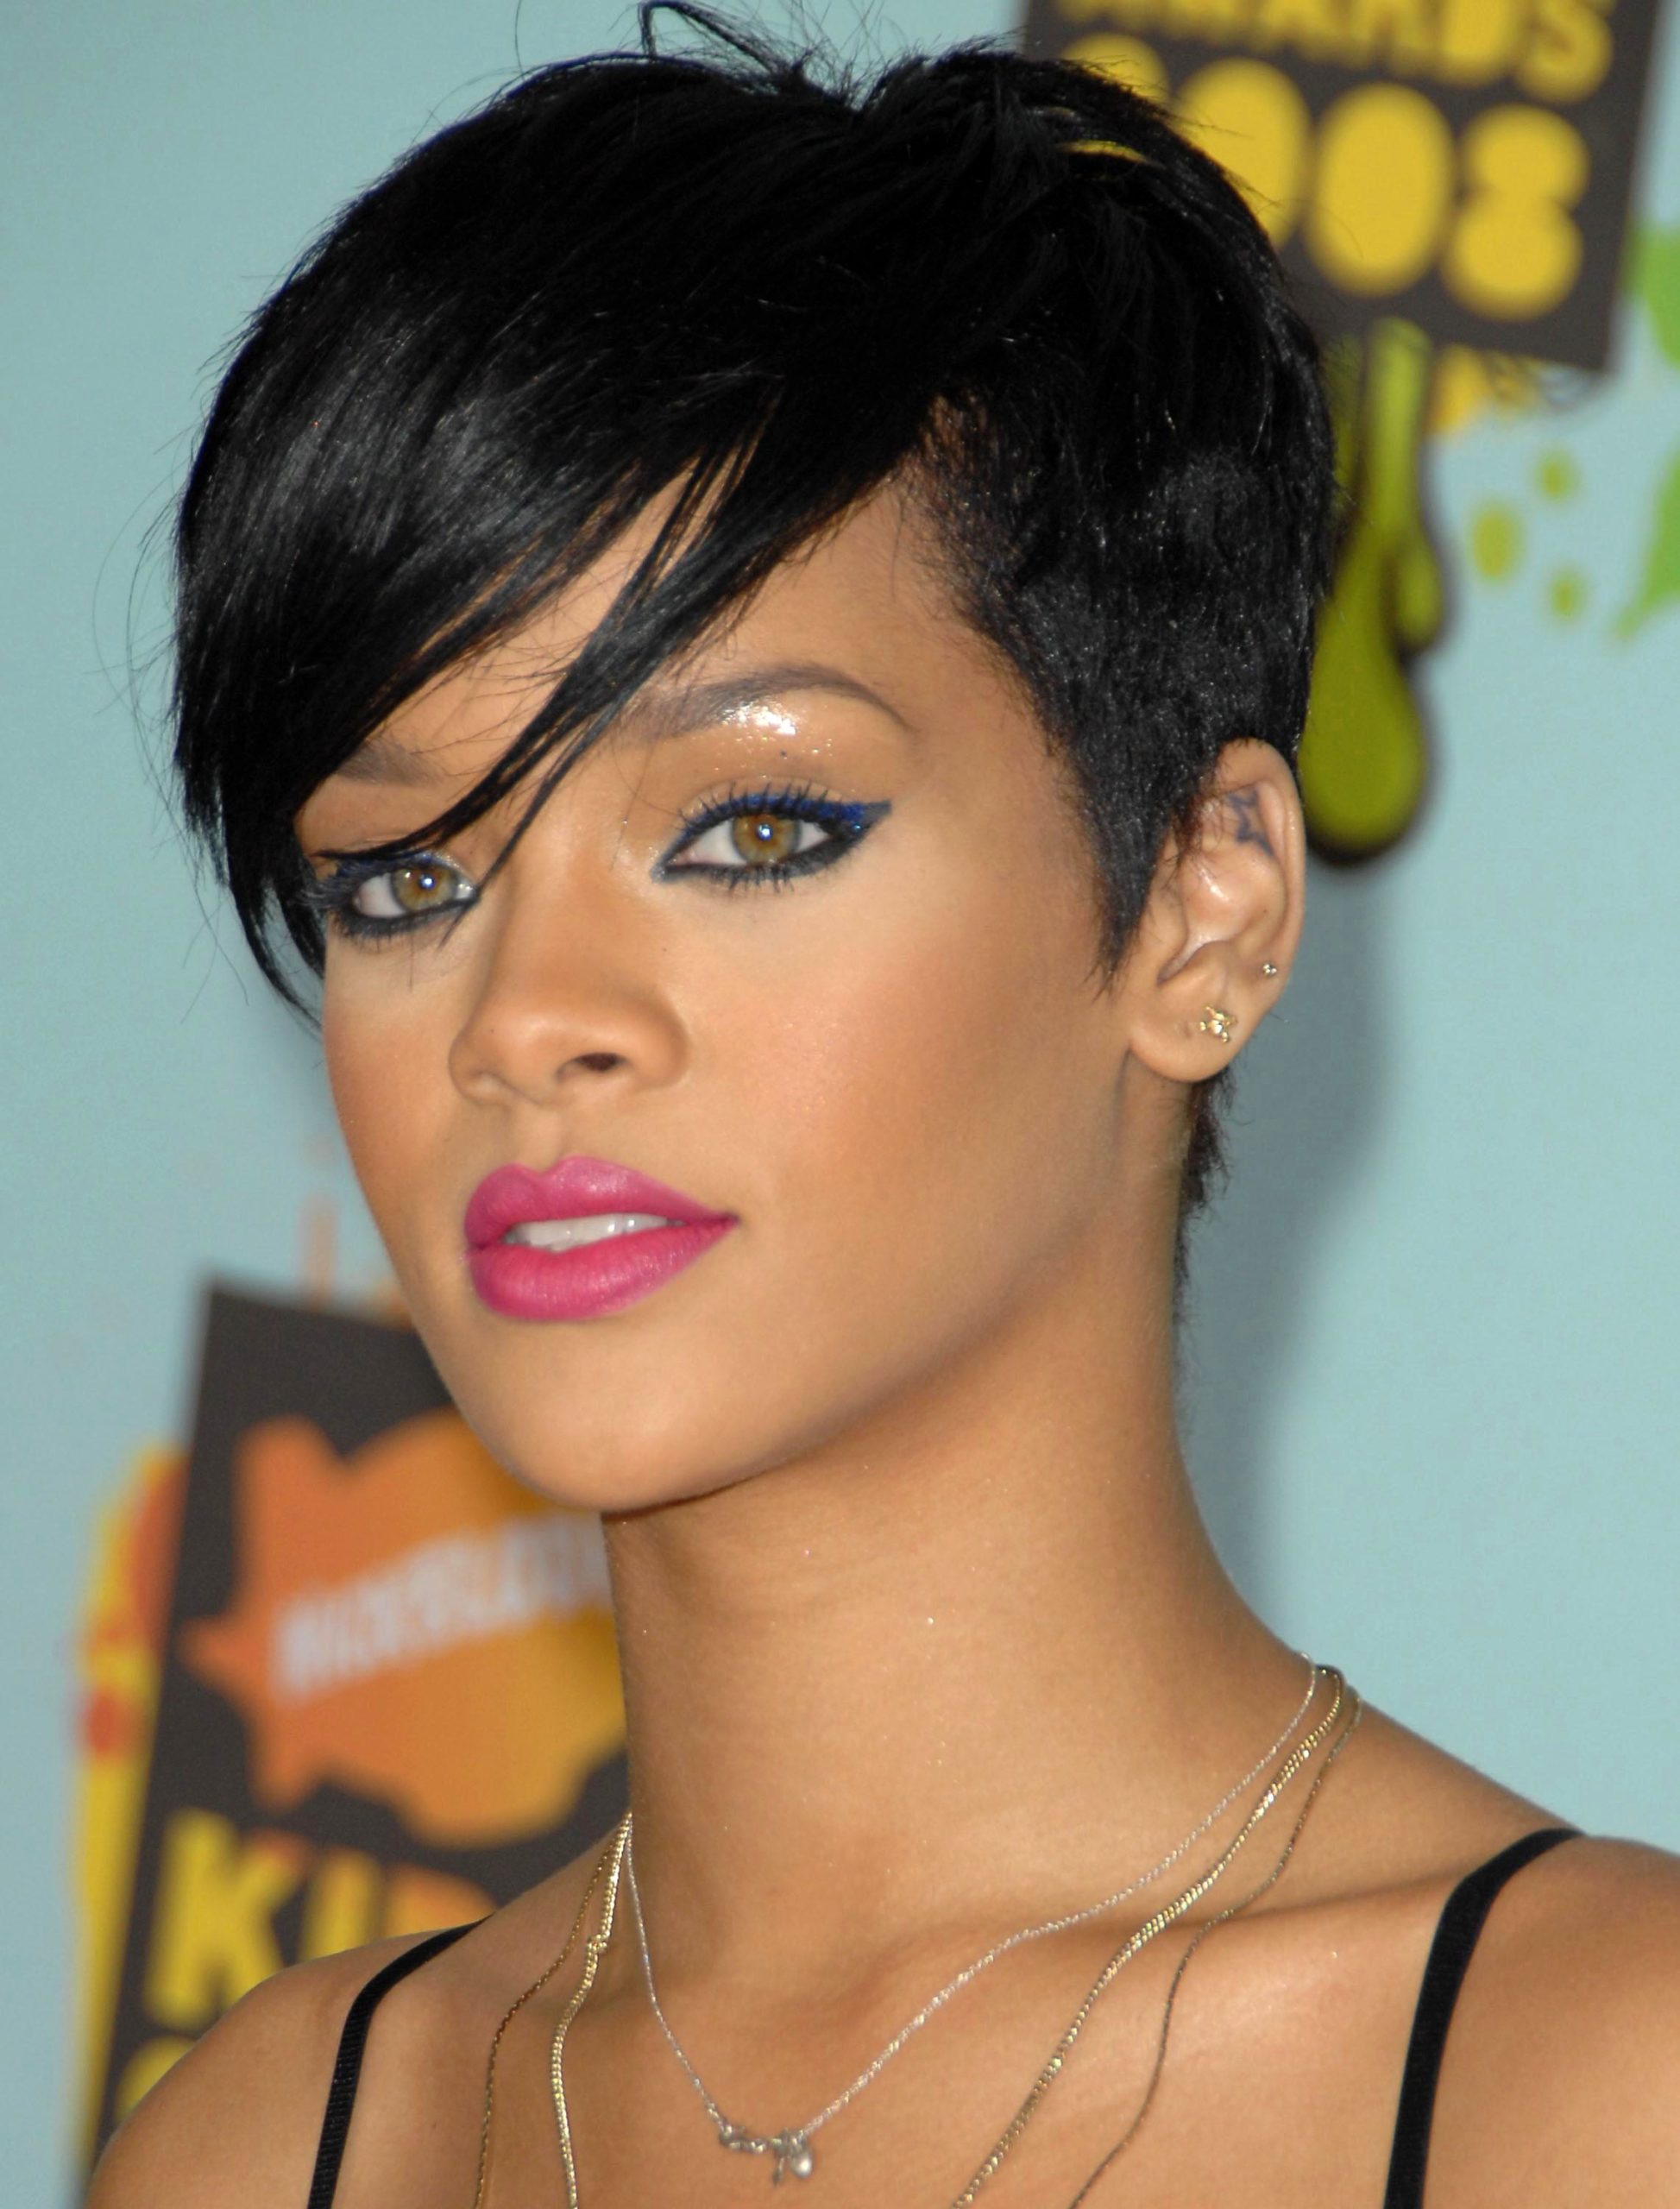 What Is Your Favorite Rihanna Hairstyle?